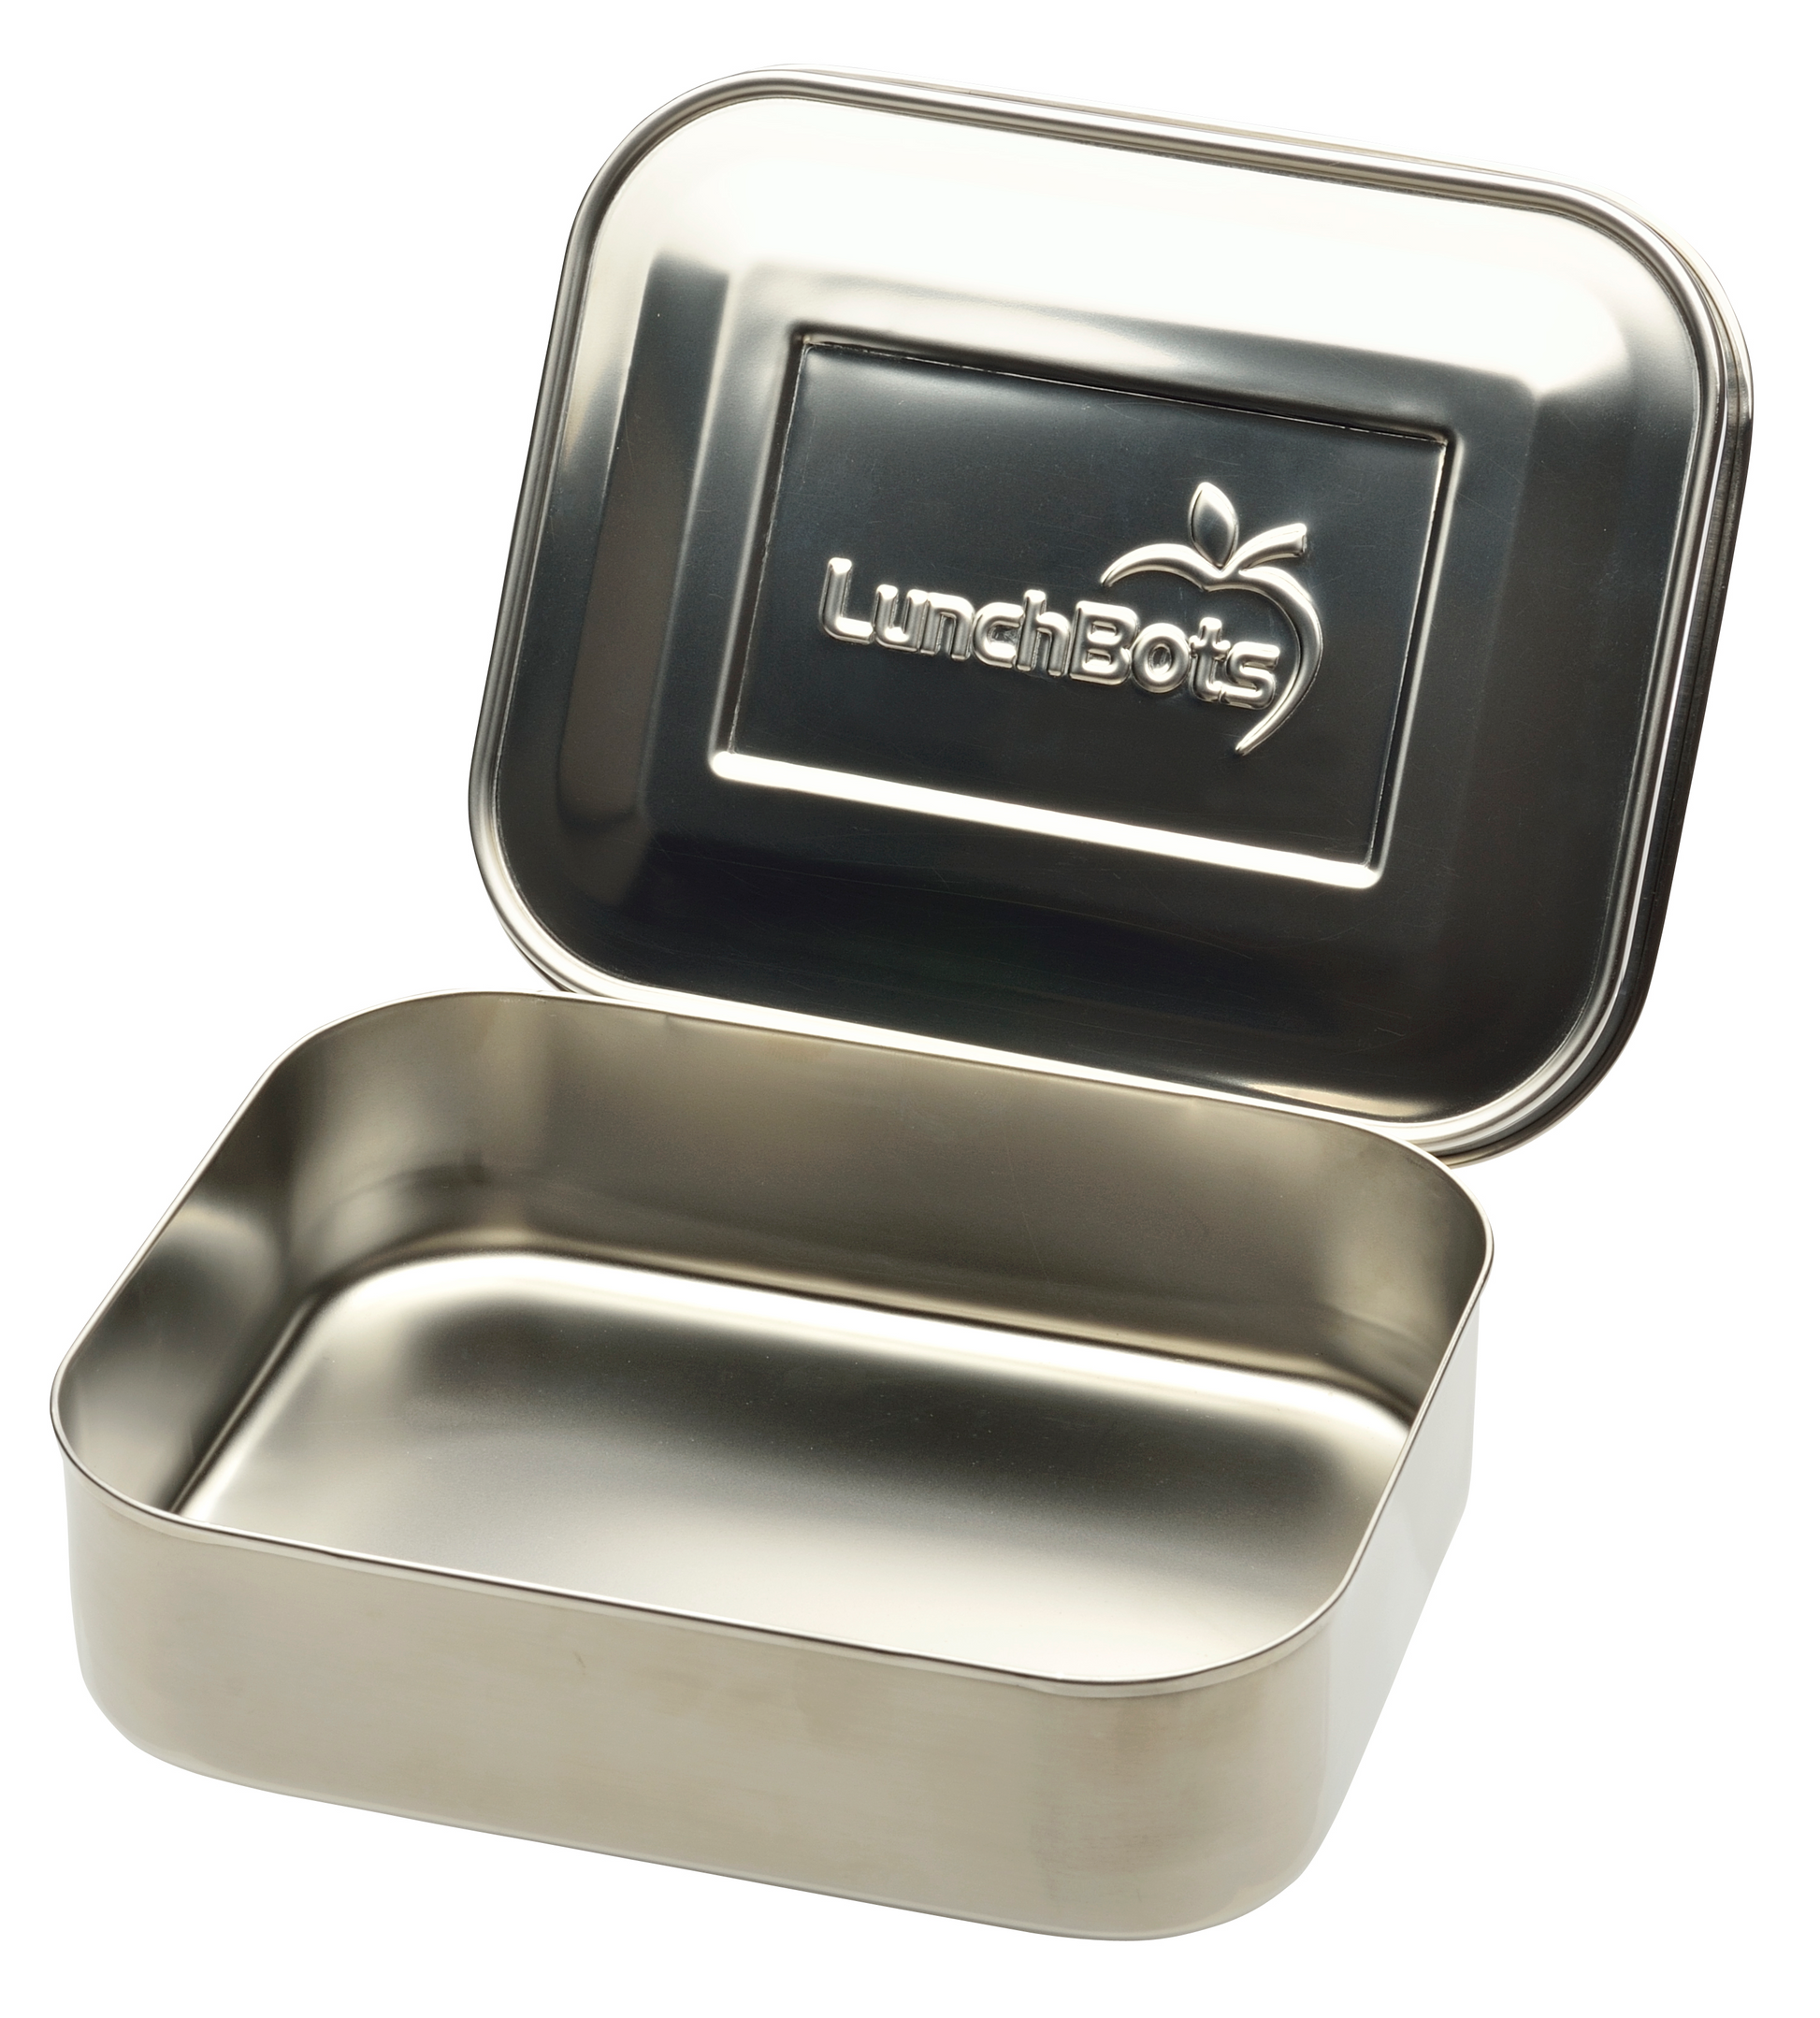  LunchBots Rounds Leak Proof 4 oz. Stainless Snack